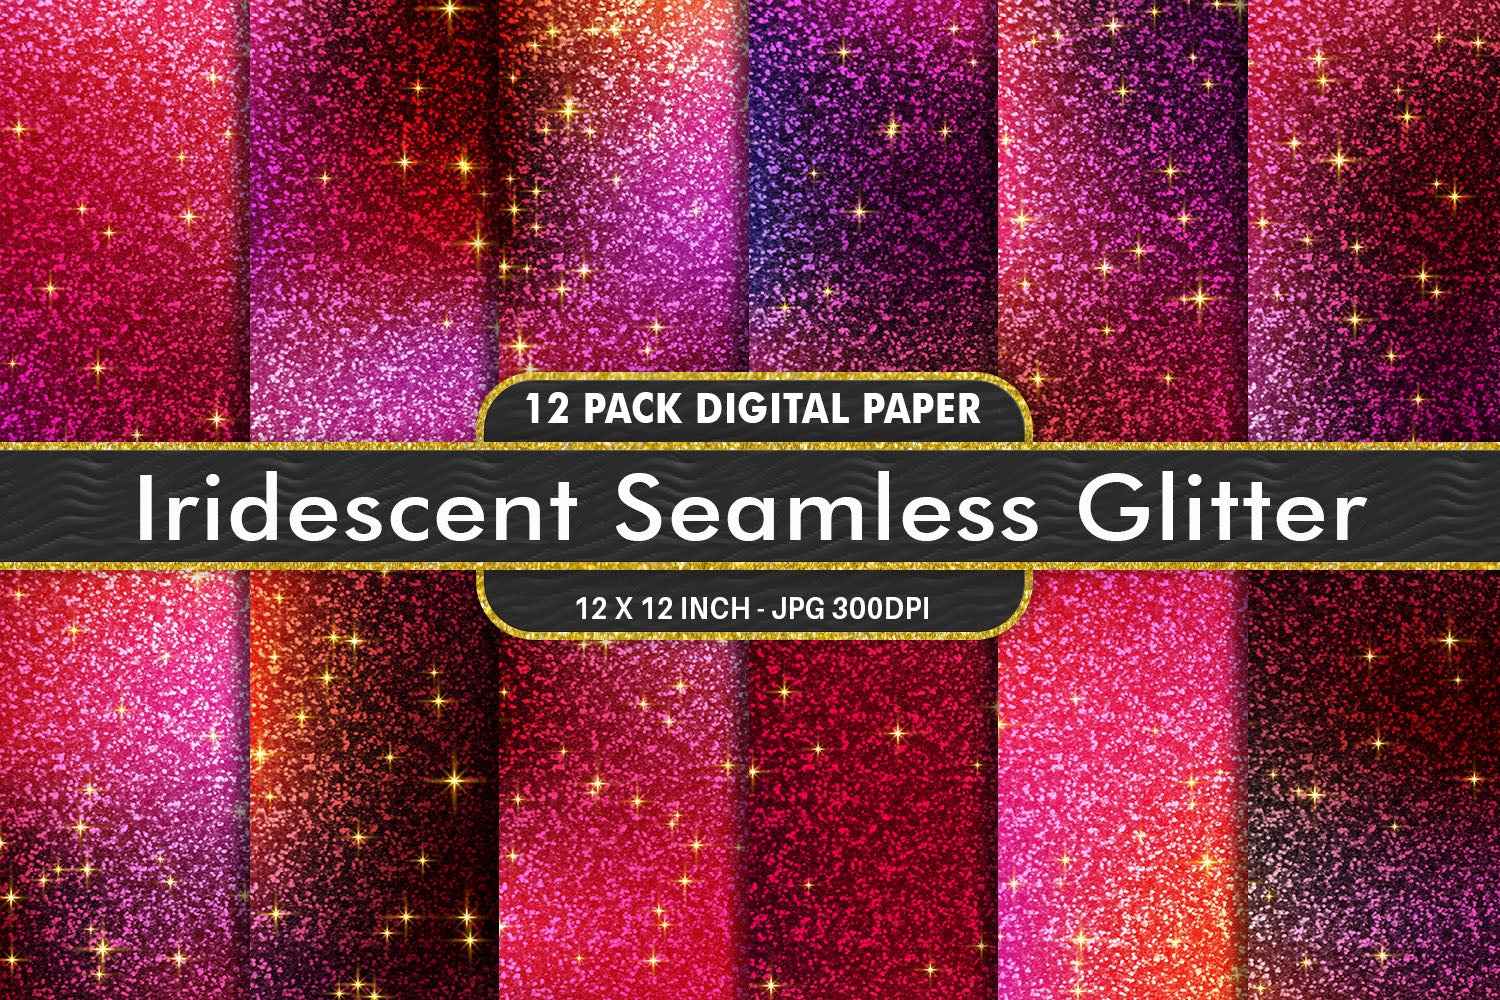 Pink digital paper: PINK TEXTURES with pink background, pink